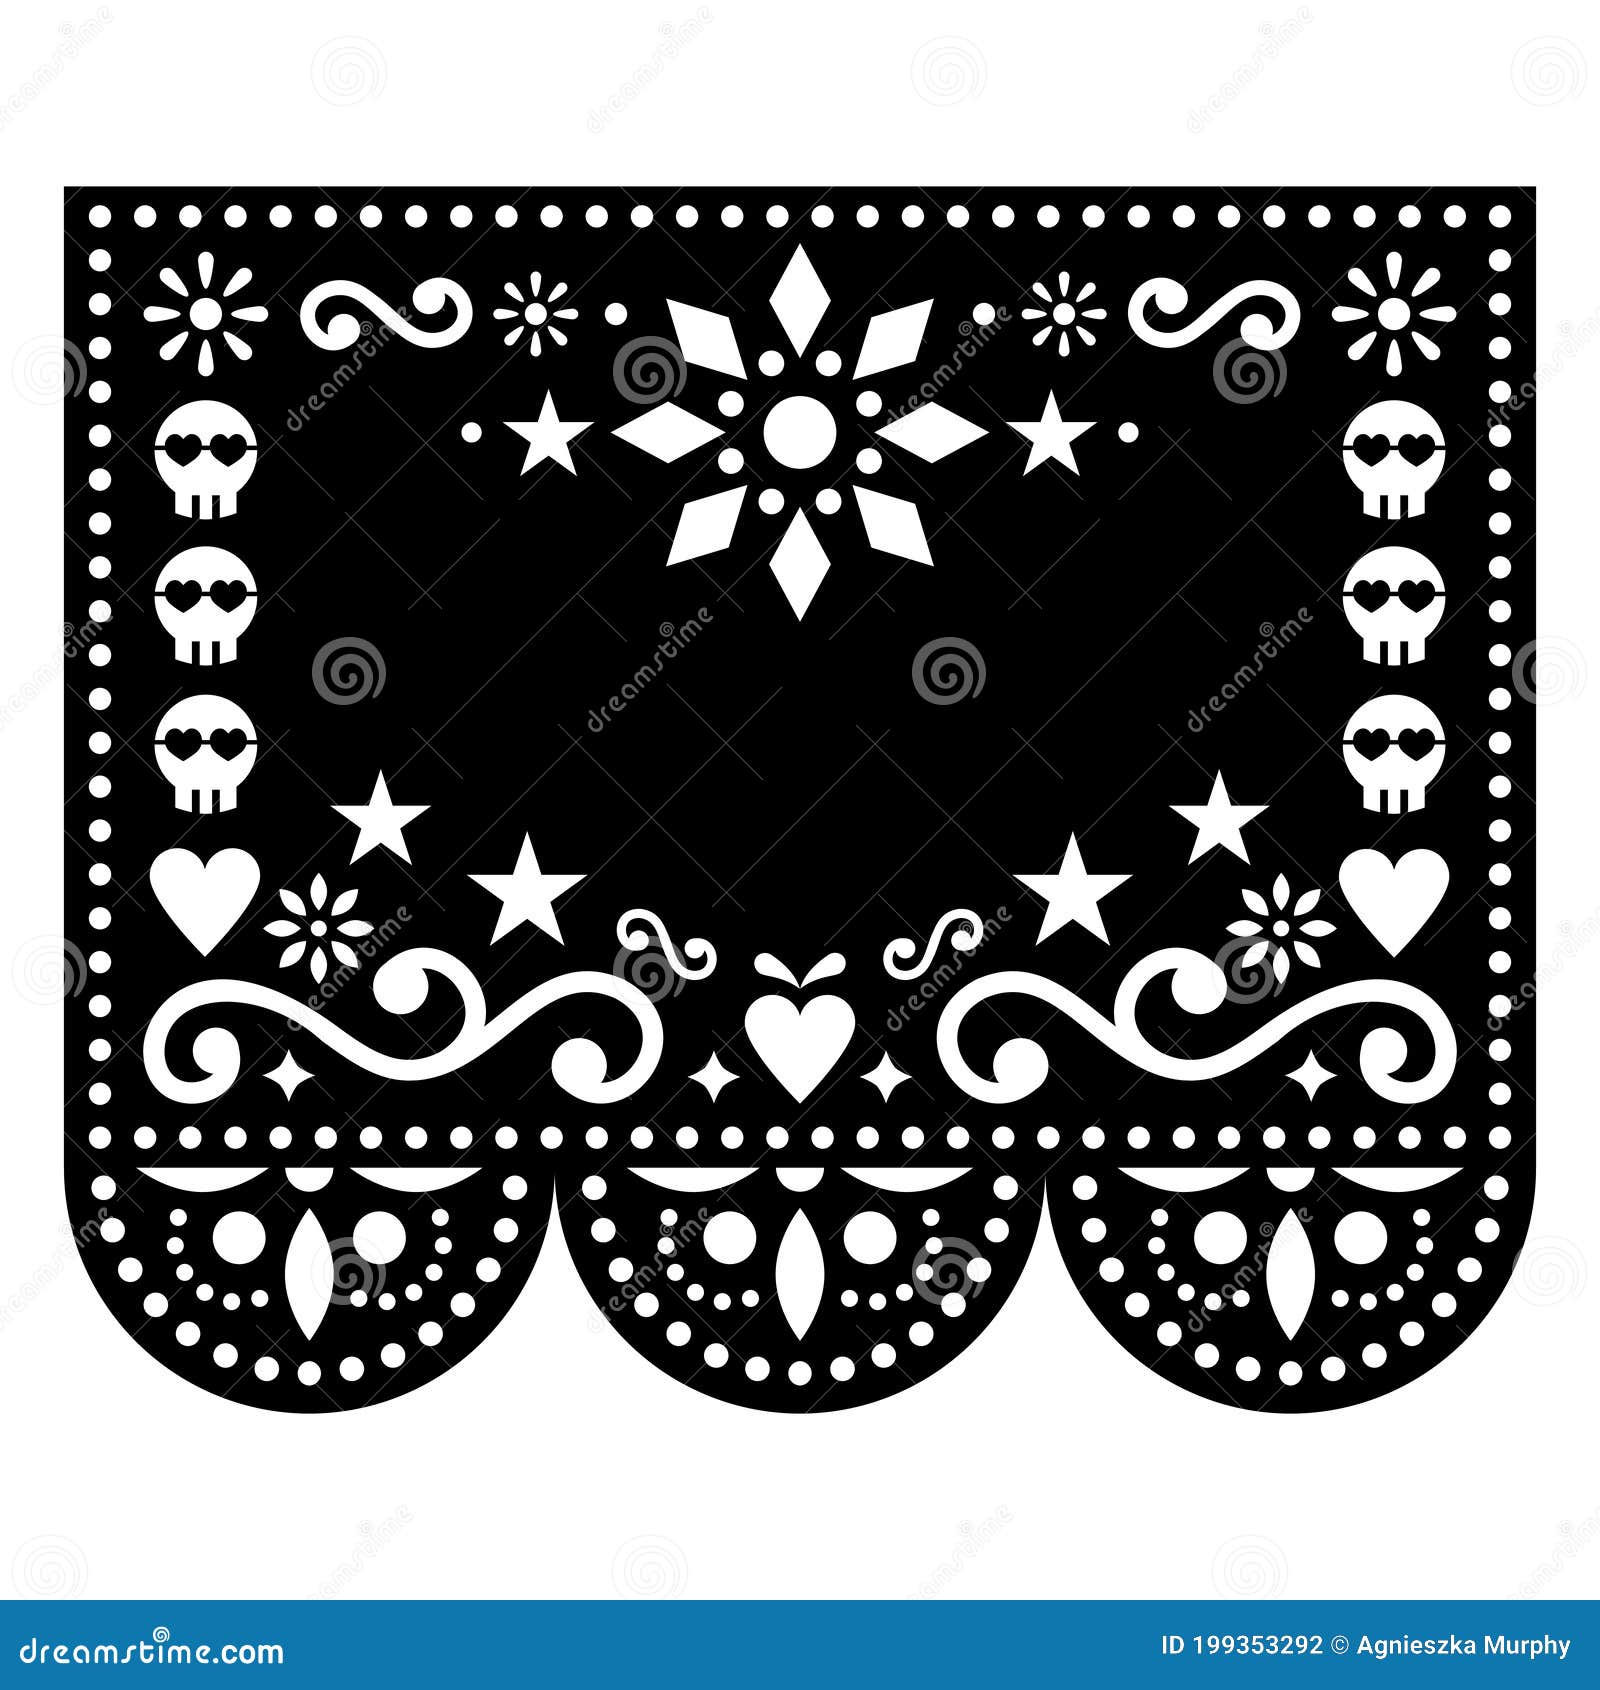 halloween and day of the dead papel picado   with skulls and flowers, mexican paper cut out pattern - dia de los muert